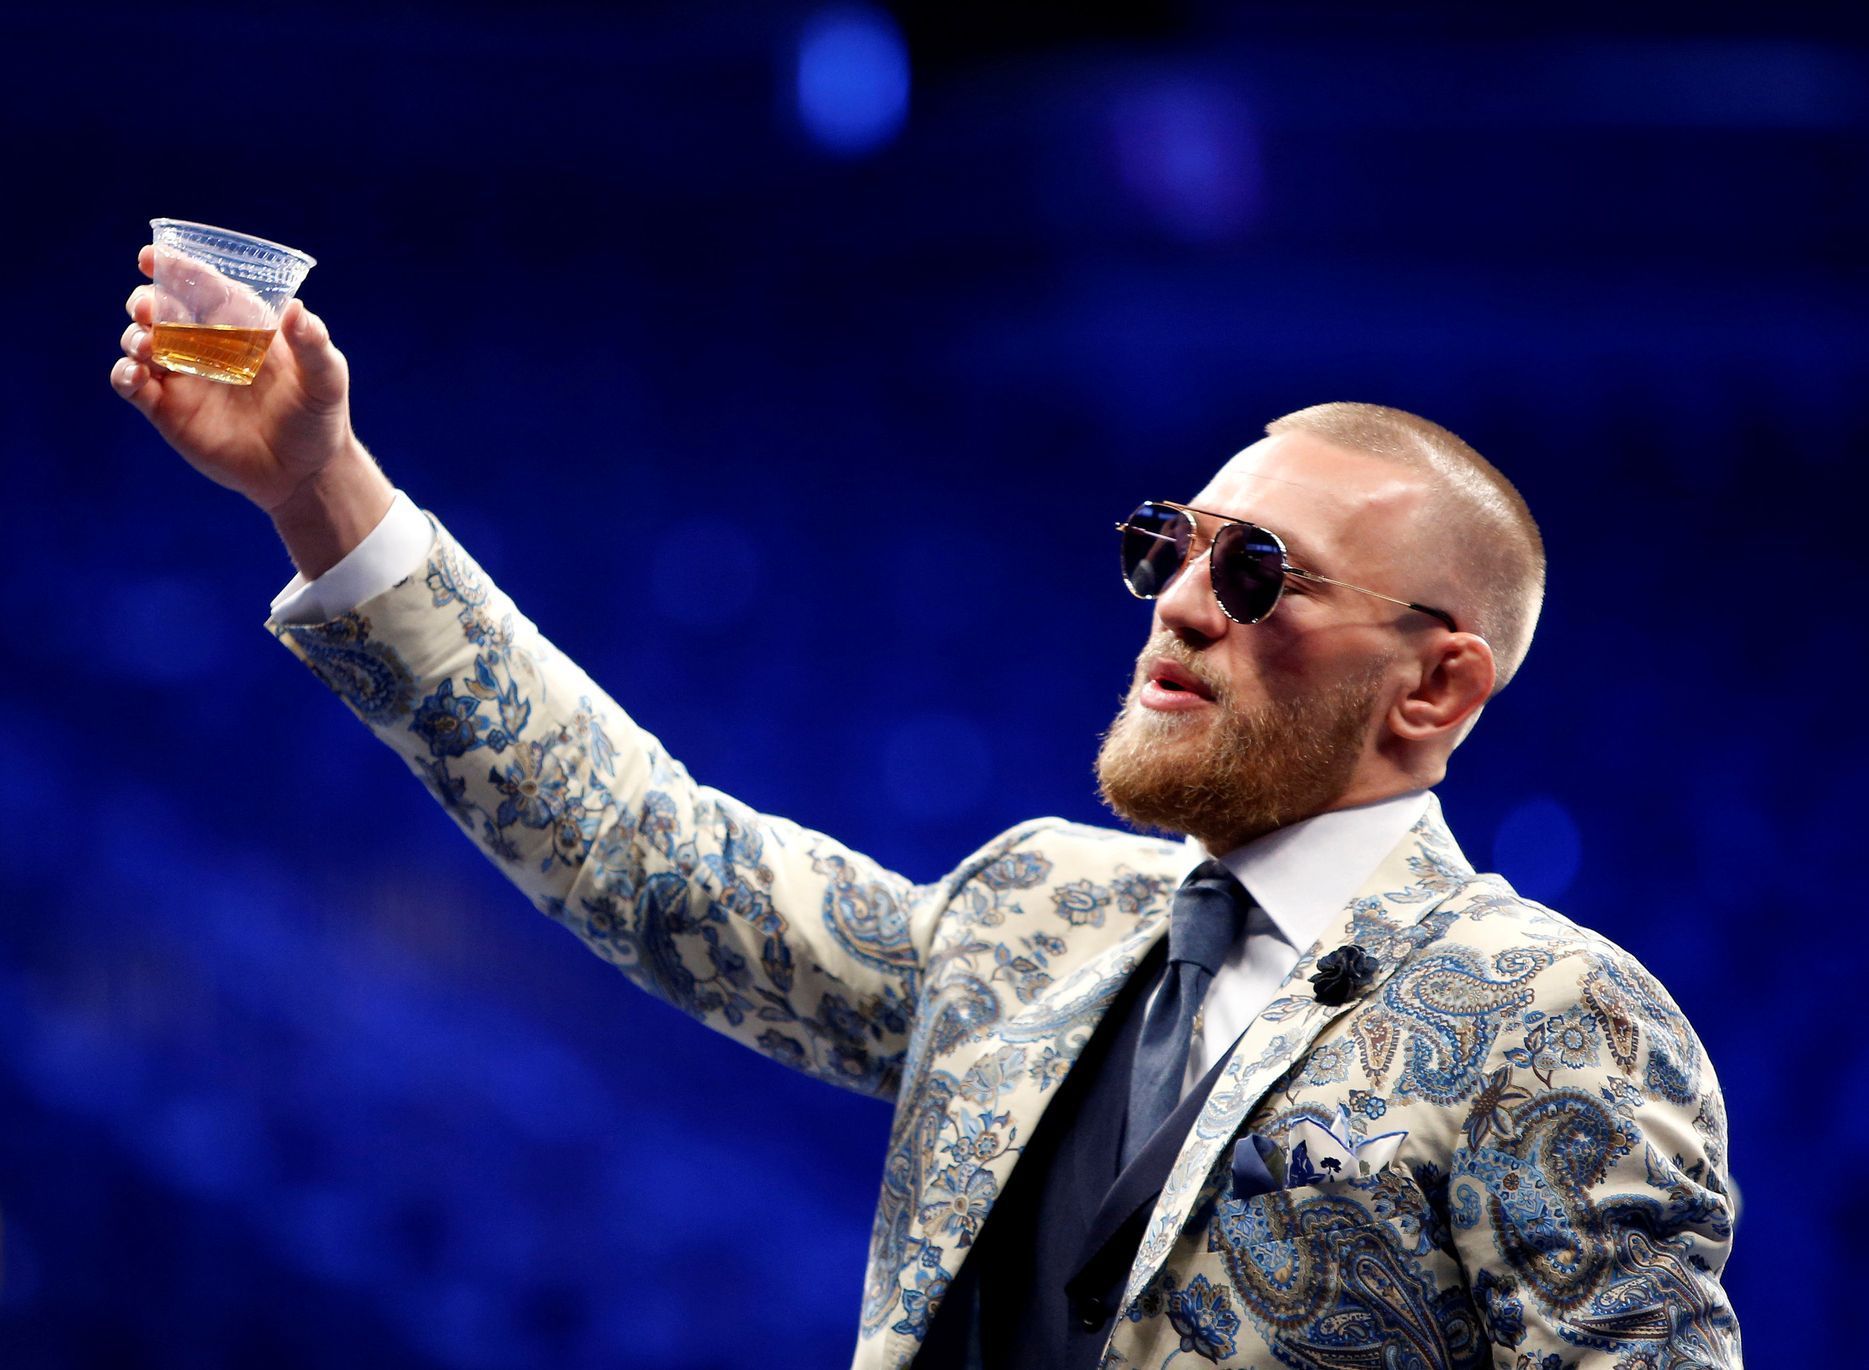 FILE PHOTO: UFC lightweight champion Conor McGregor of Ireland raises a cup of Irish whiskey during post-fight news conference at T-Mobile Arena in Las Vegas